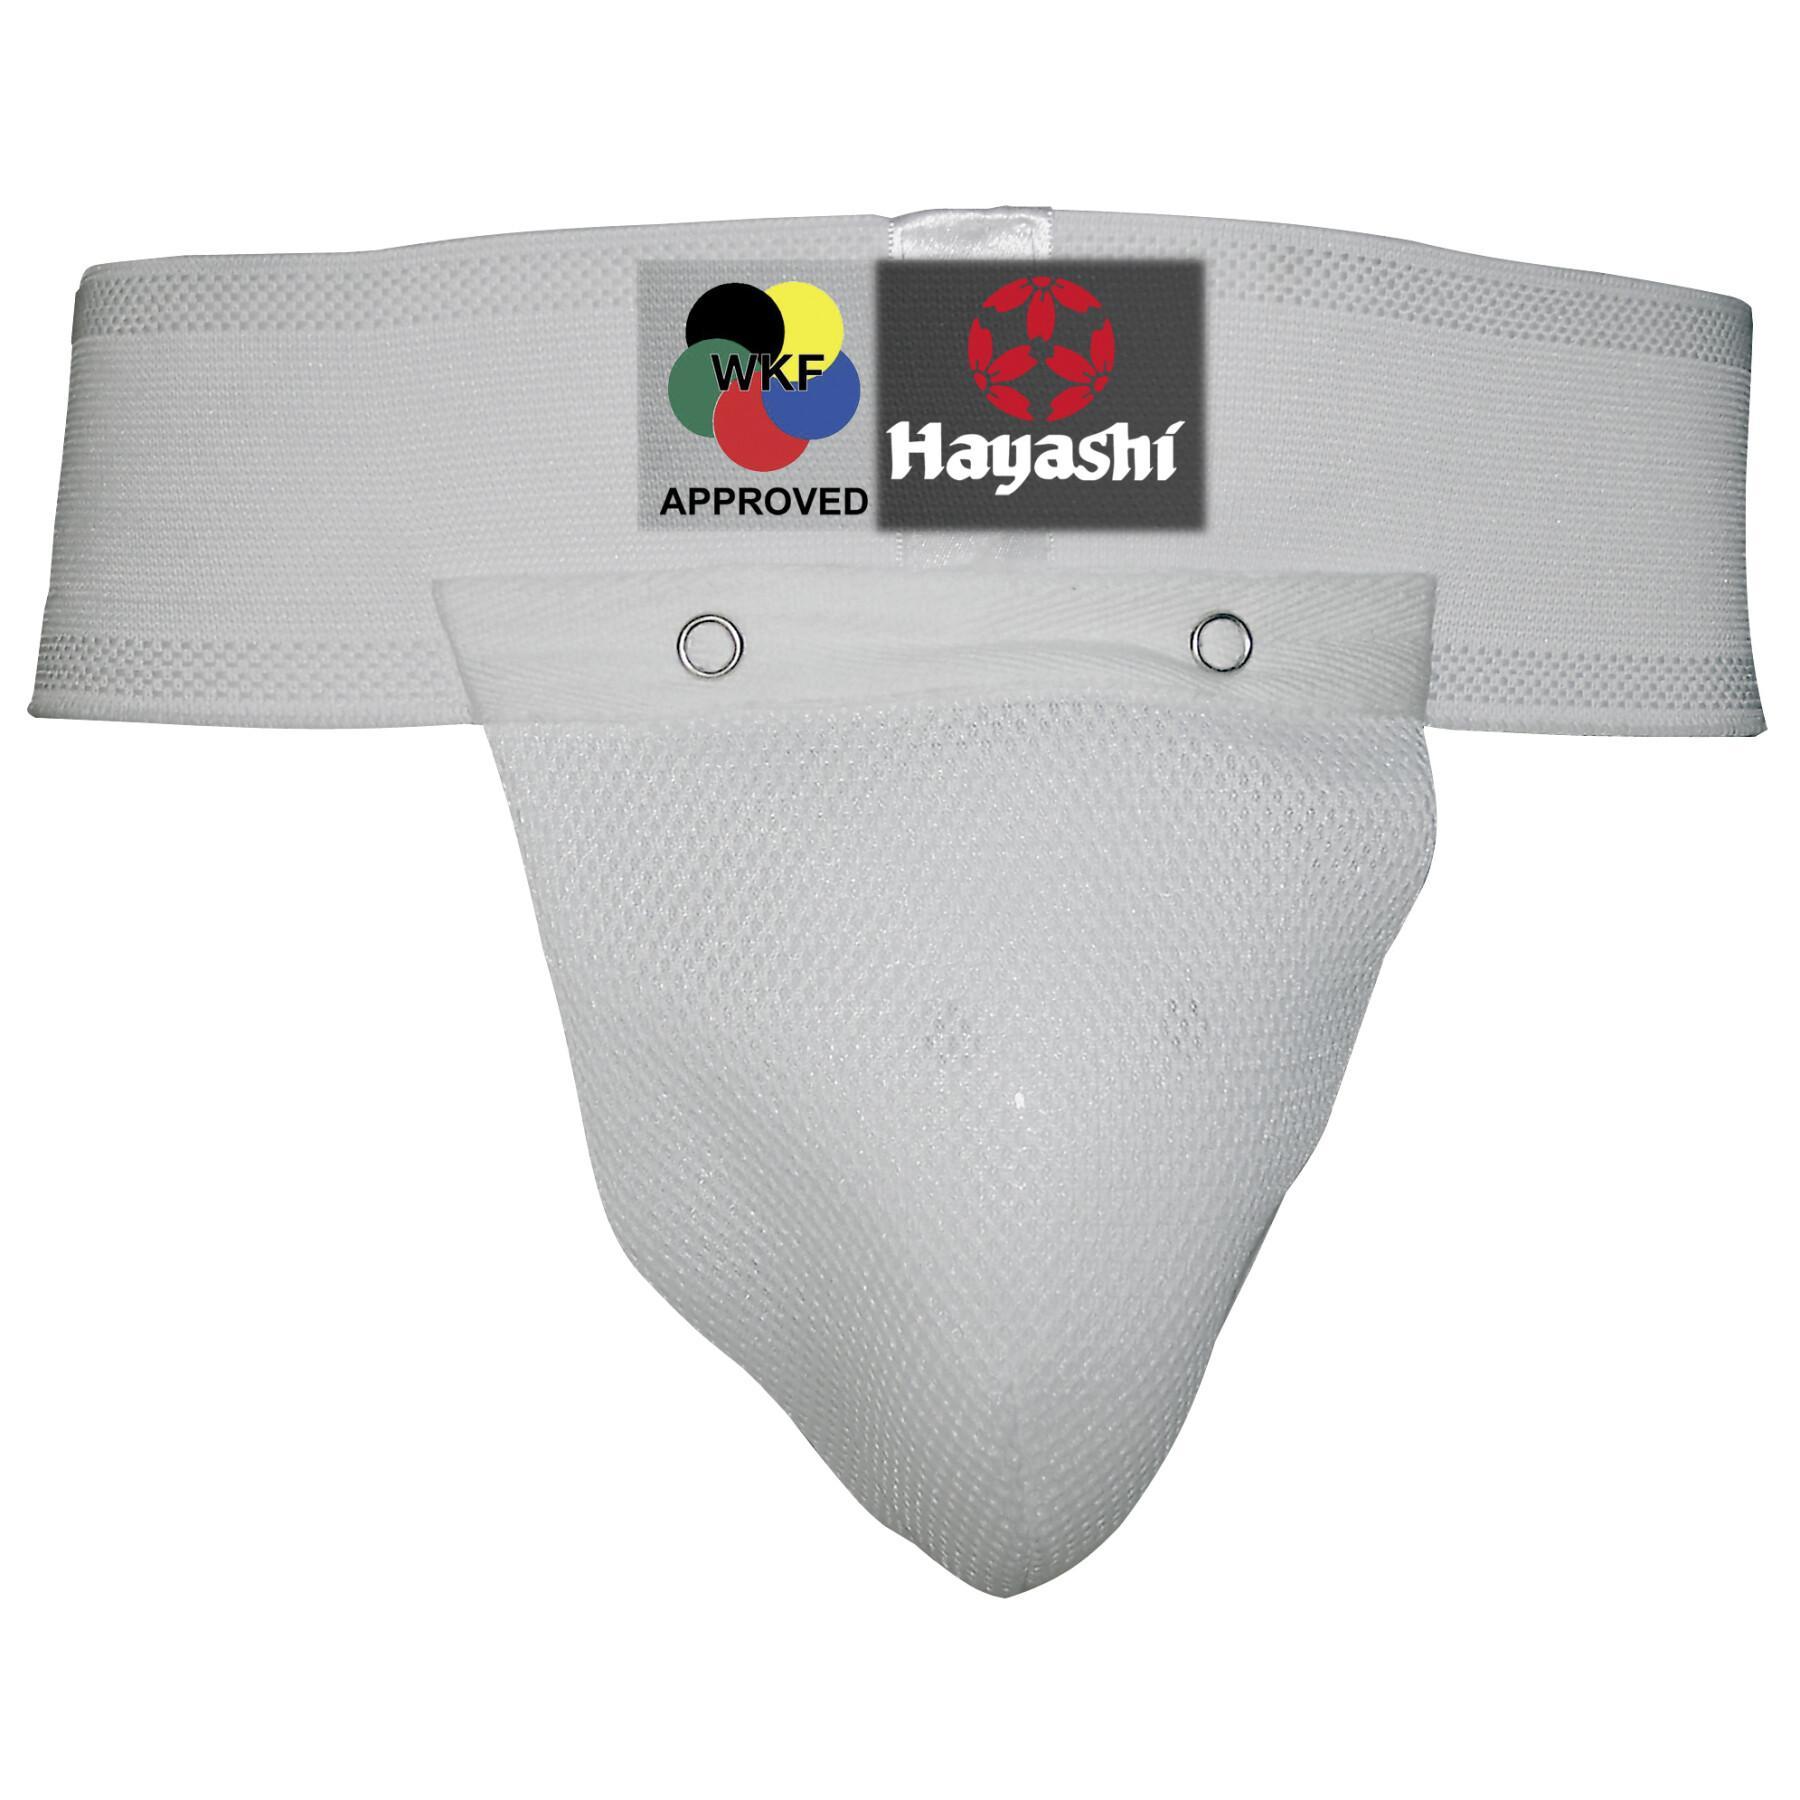 Coquille de protection Hayashi WKF approved